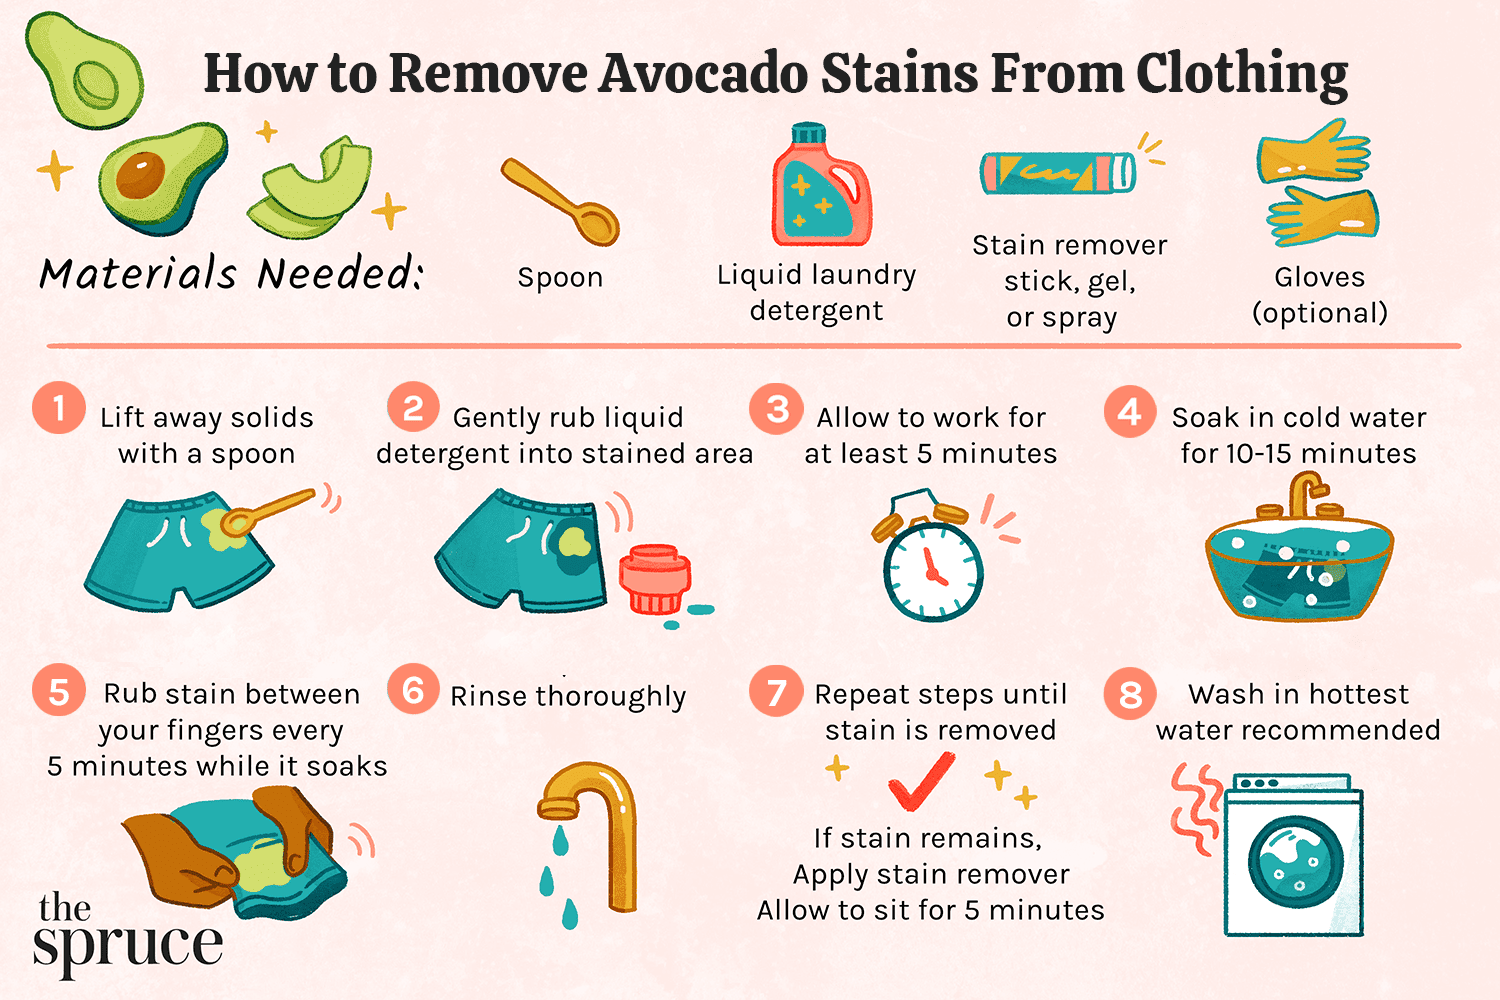 How to Remove Avocado Stains From Clothing